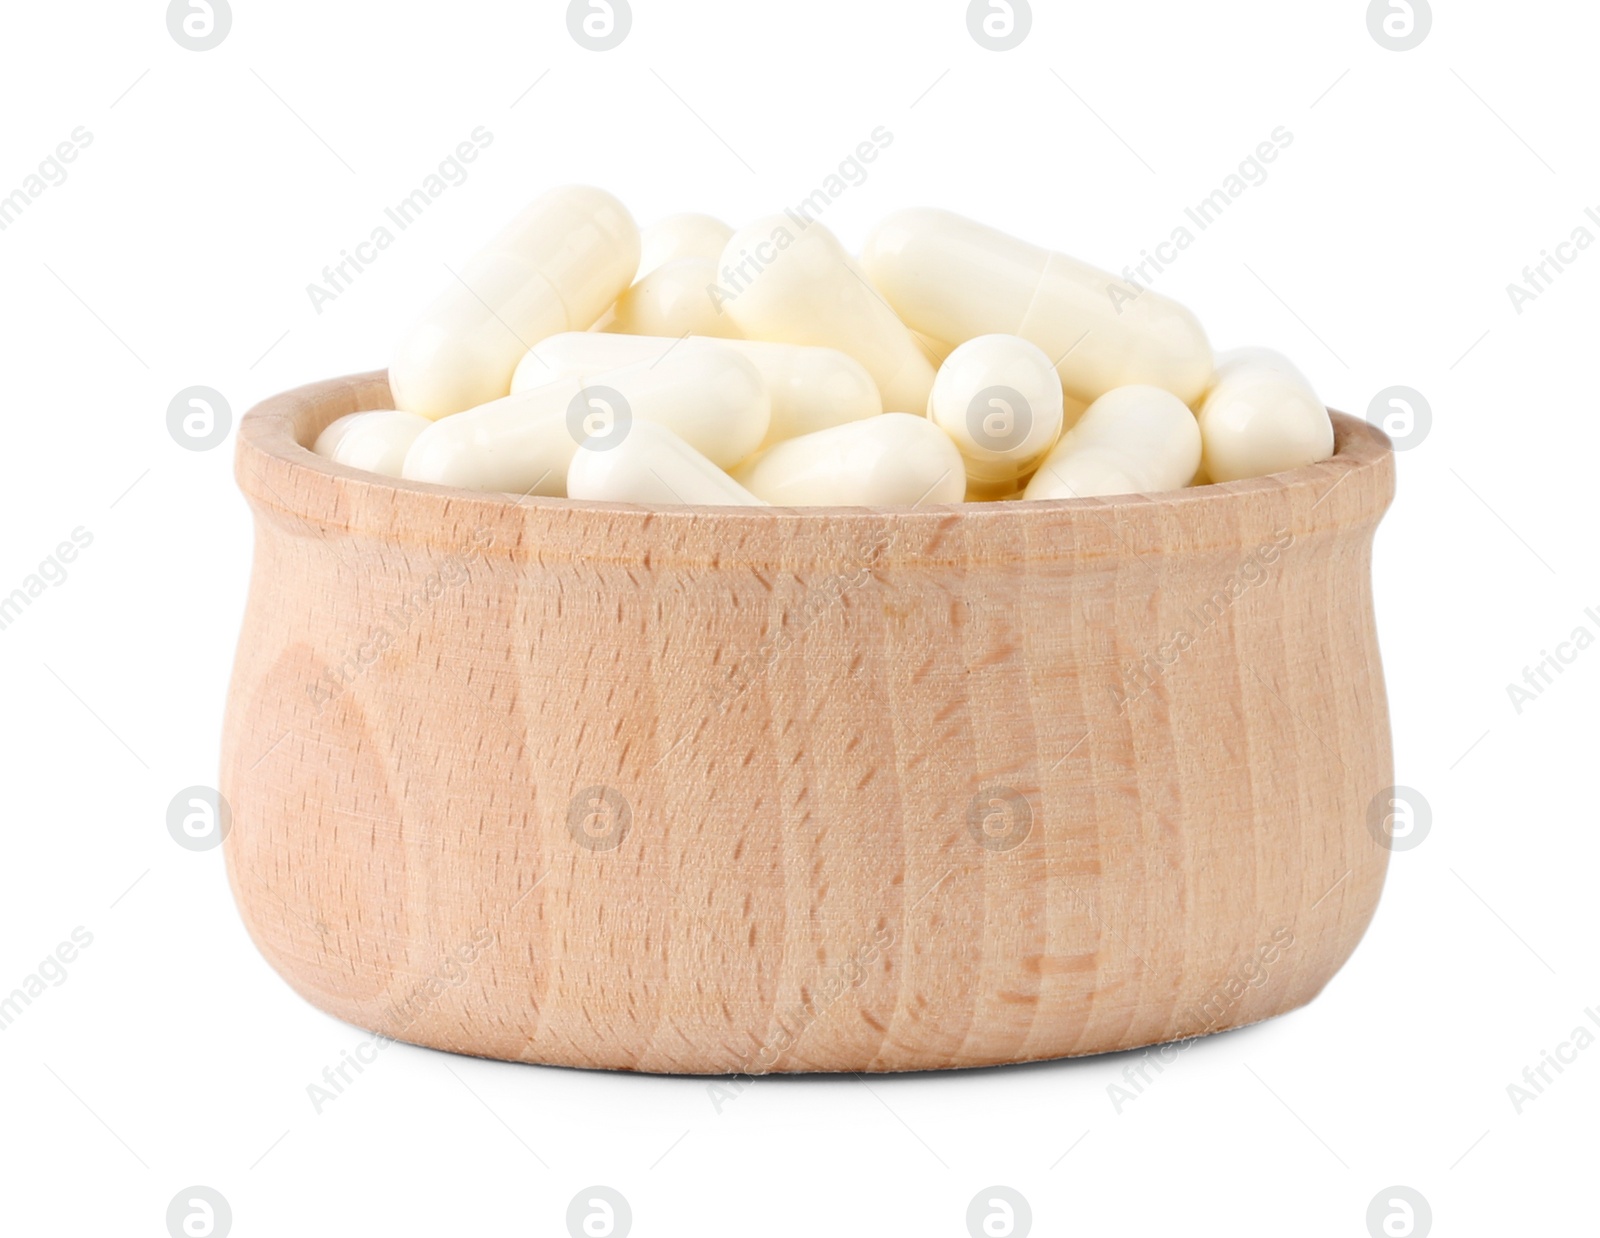 Photo of Vitamin capsules in wooden bowl isolated on white